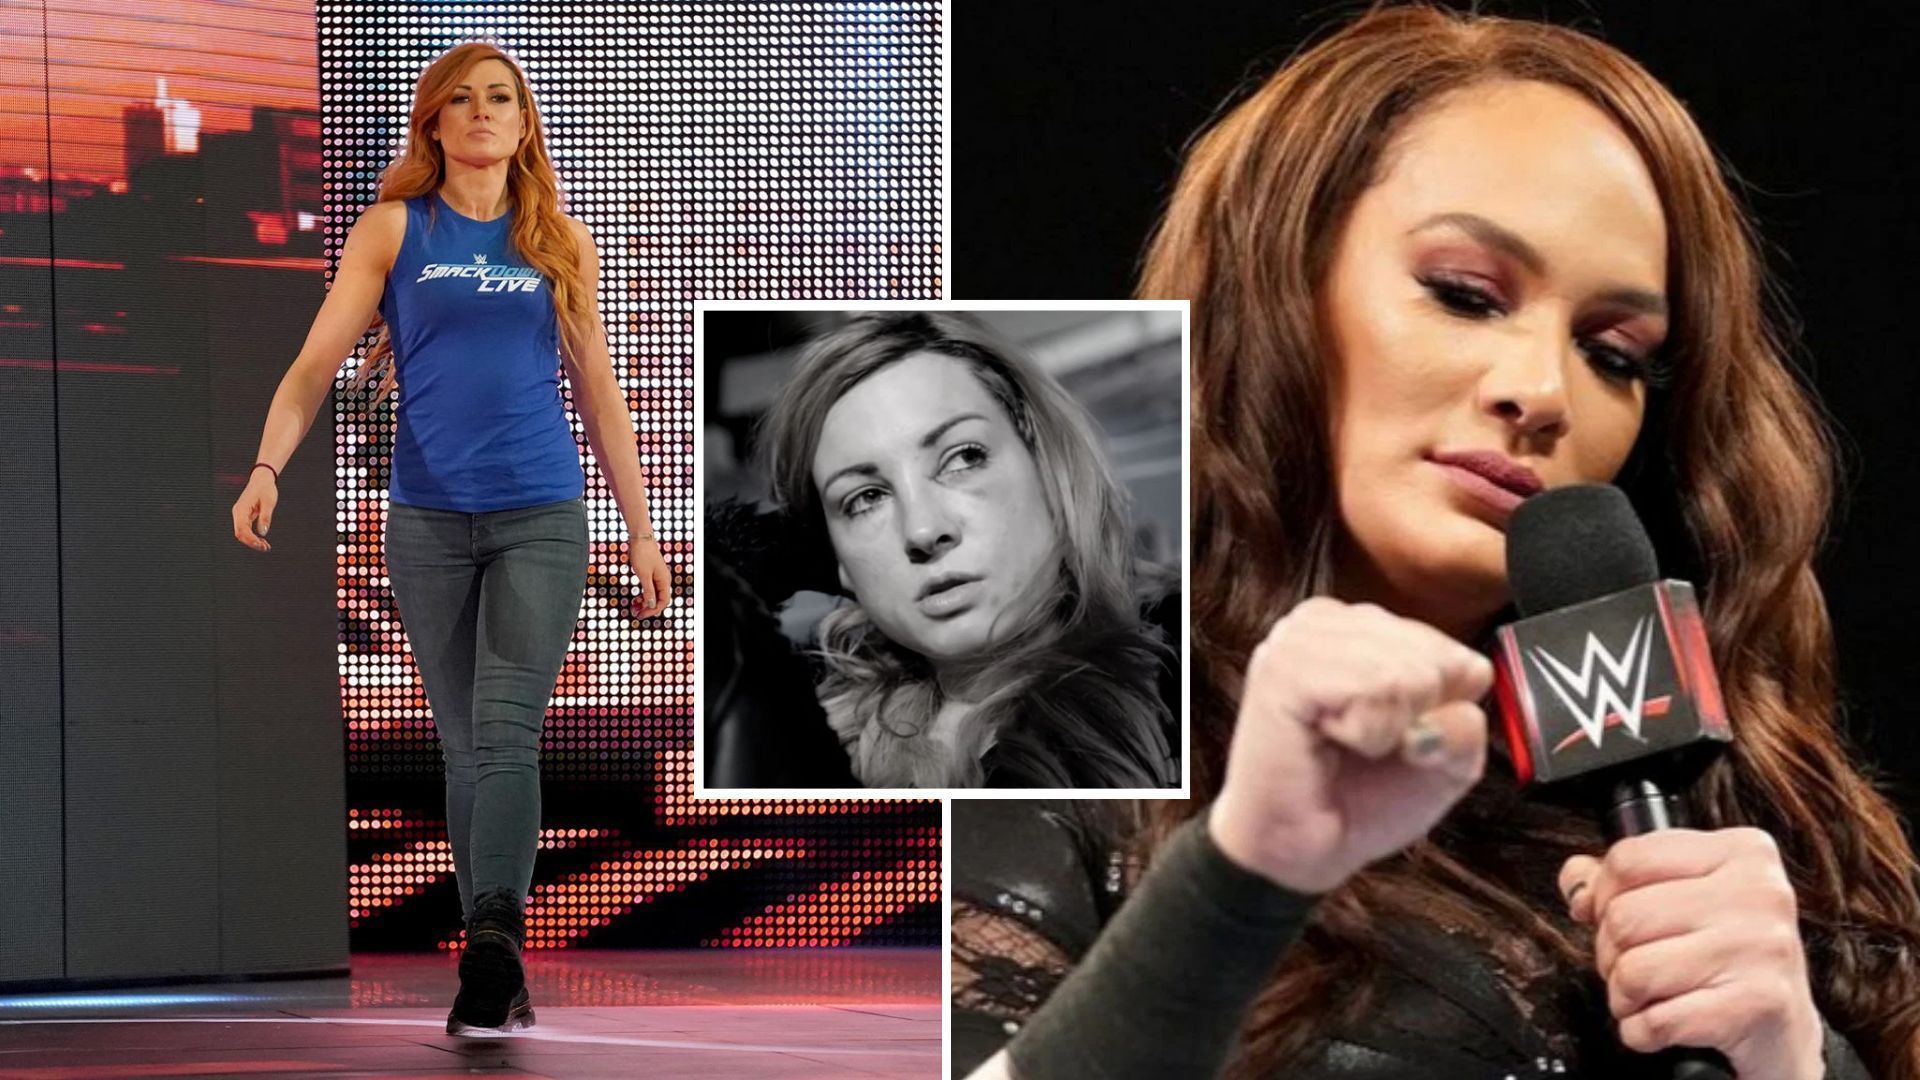 Nia Jax (right) was nicknamed The Facebreaker after punching Becky Lynch (left).